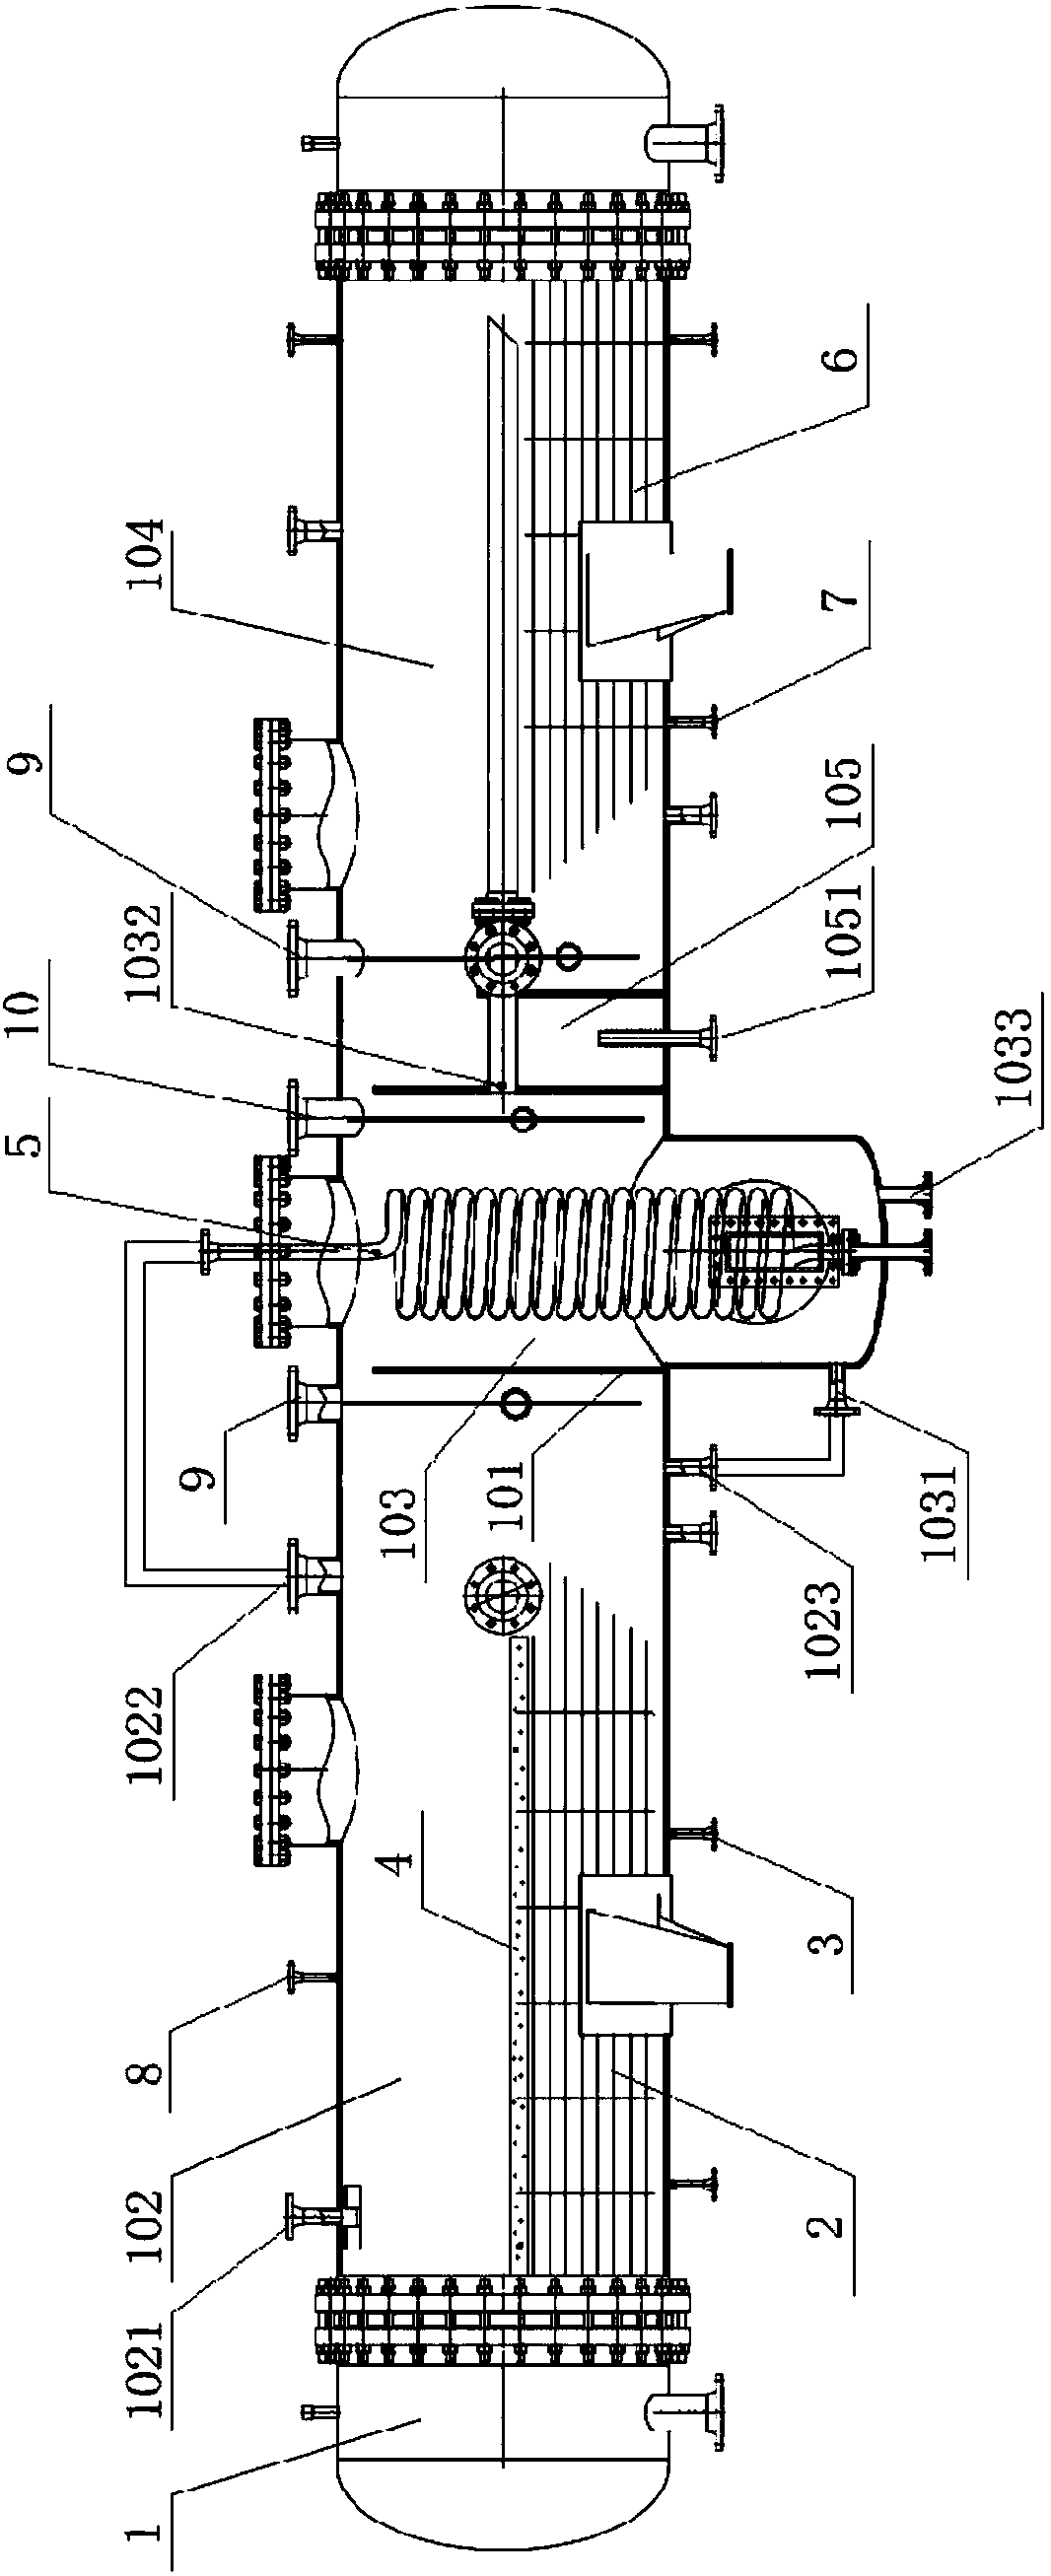 Aging oil dehydration device and method